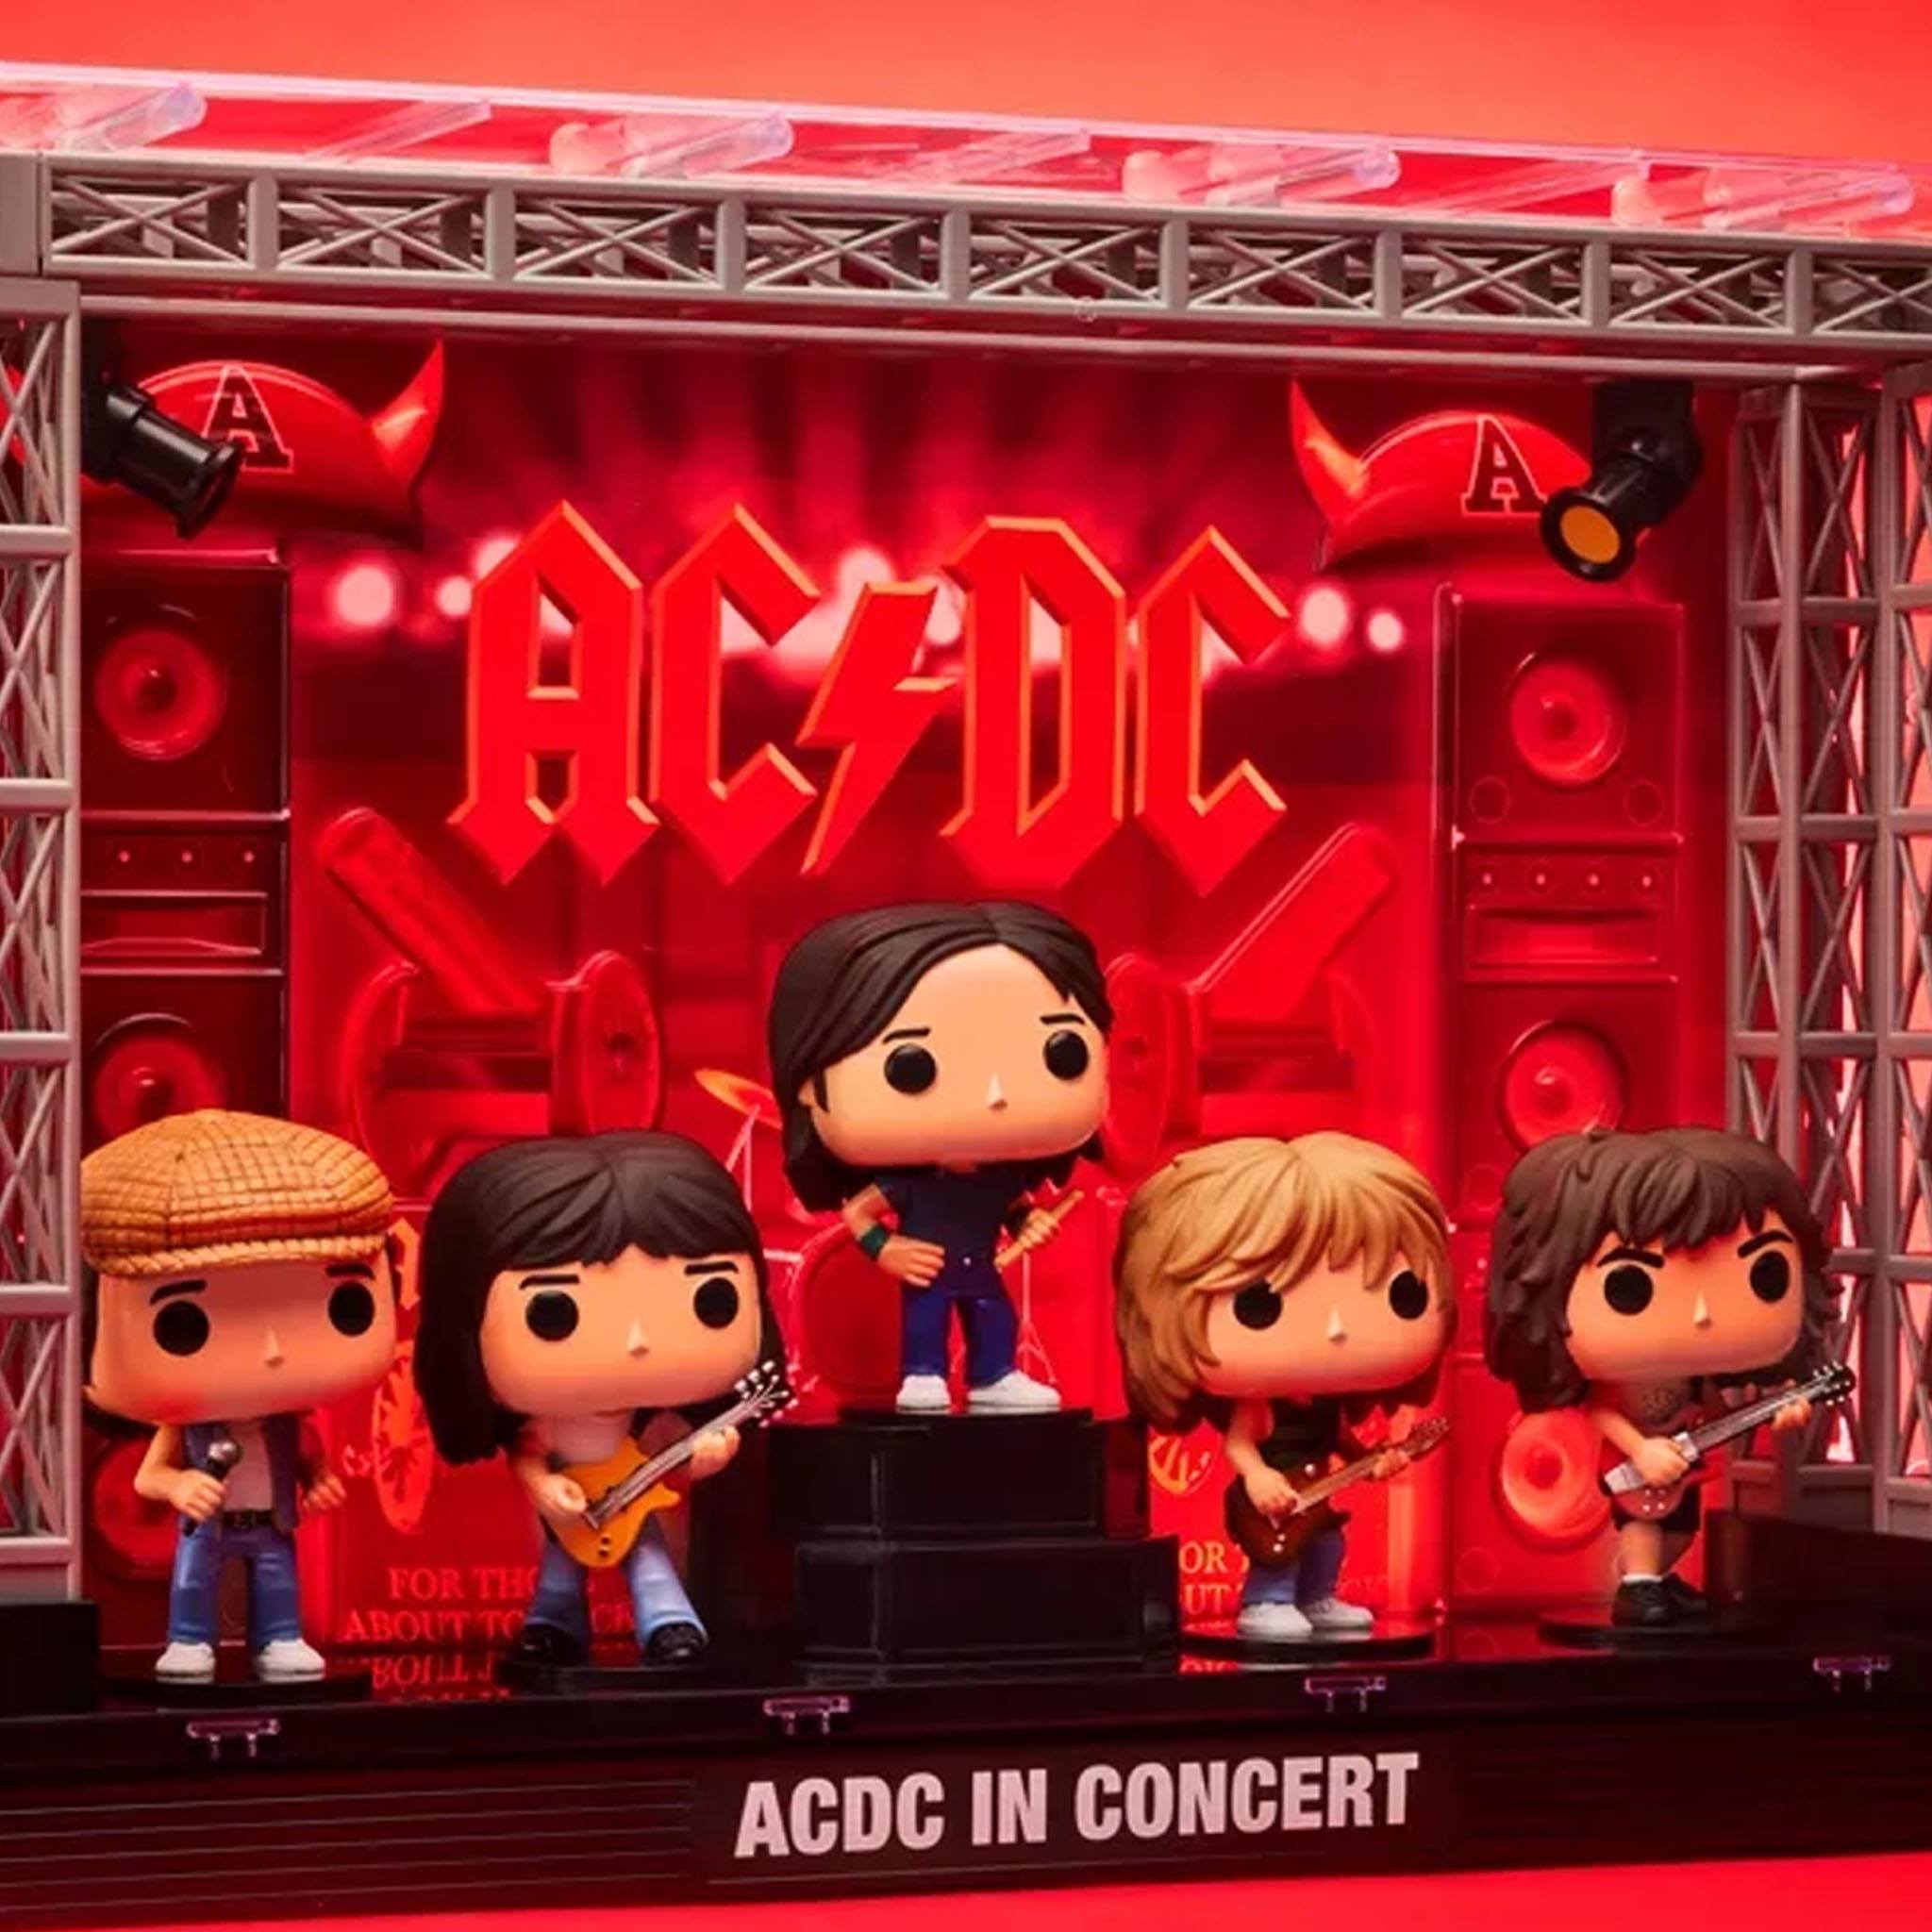 AC/DC: this new Funko POP immerses you in the concert